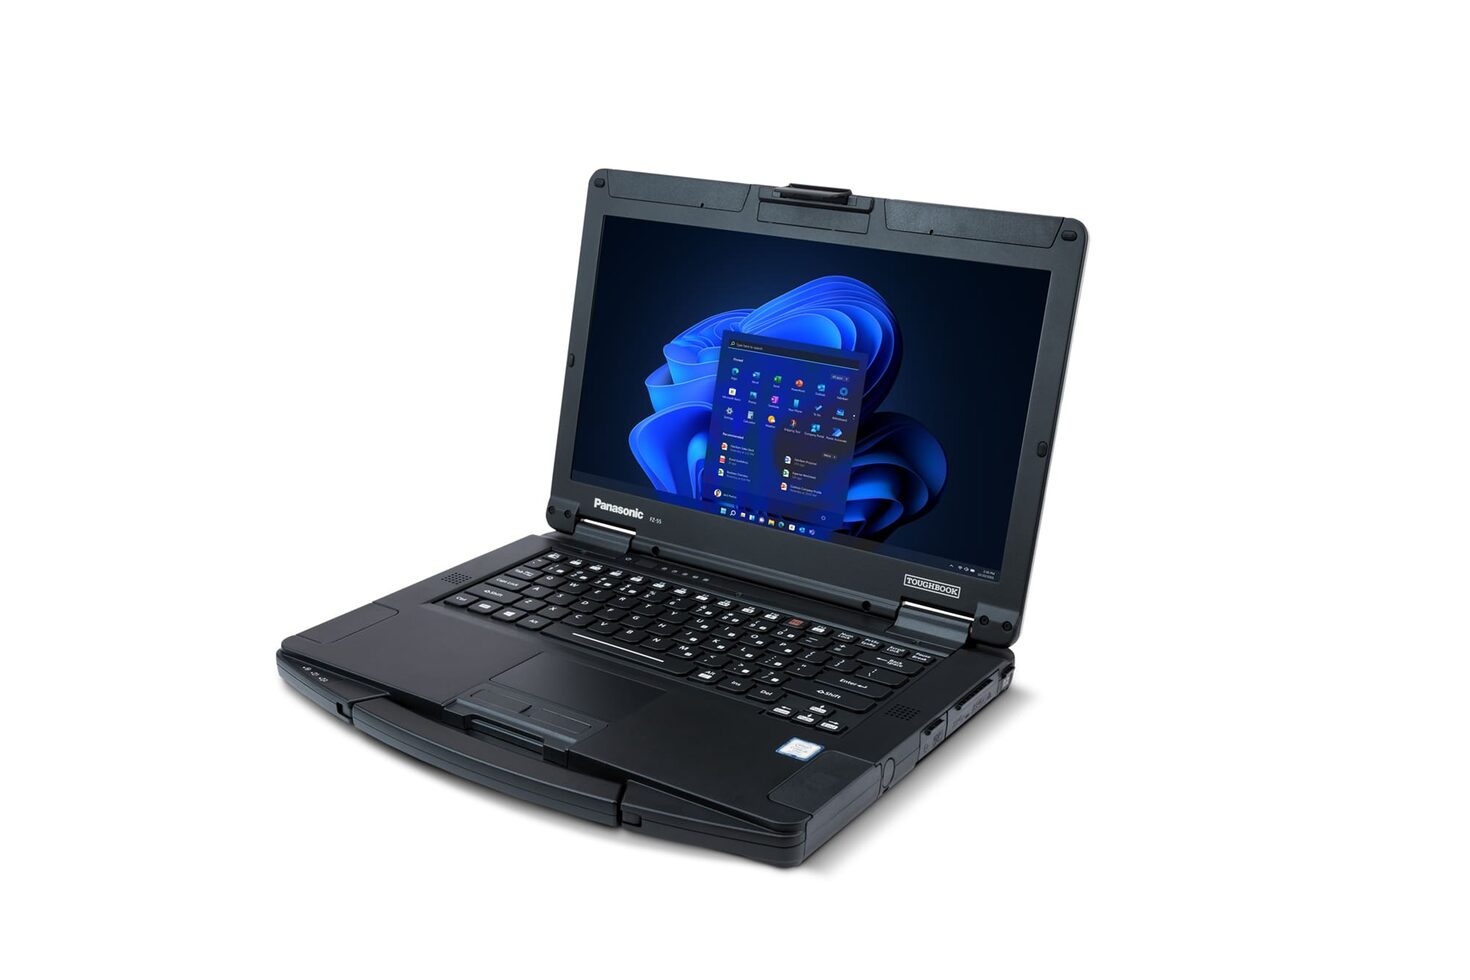 TOUGHBOOK 55 Product Image Data